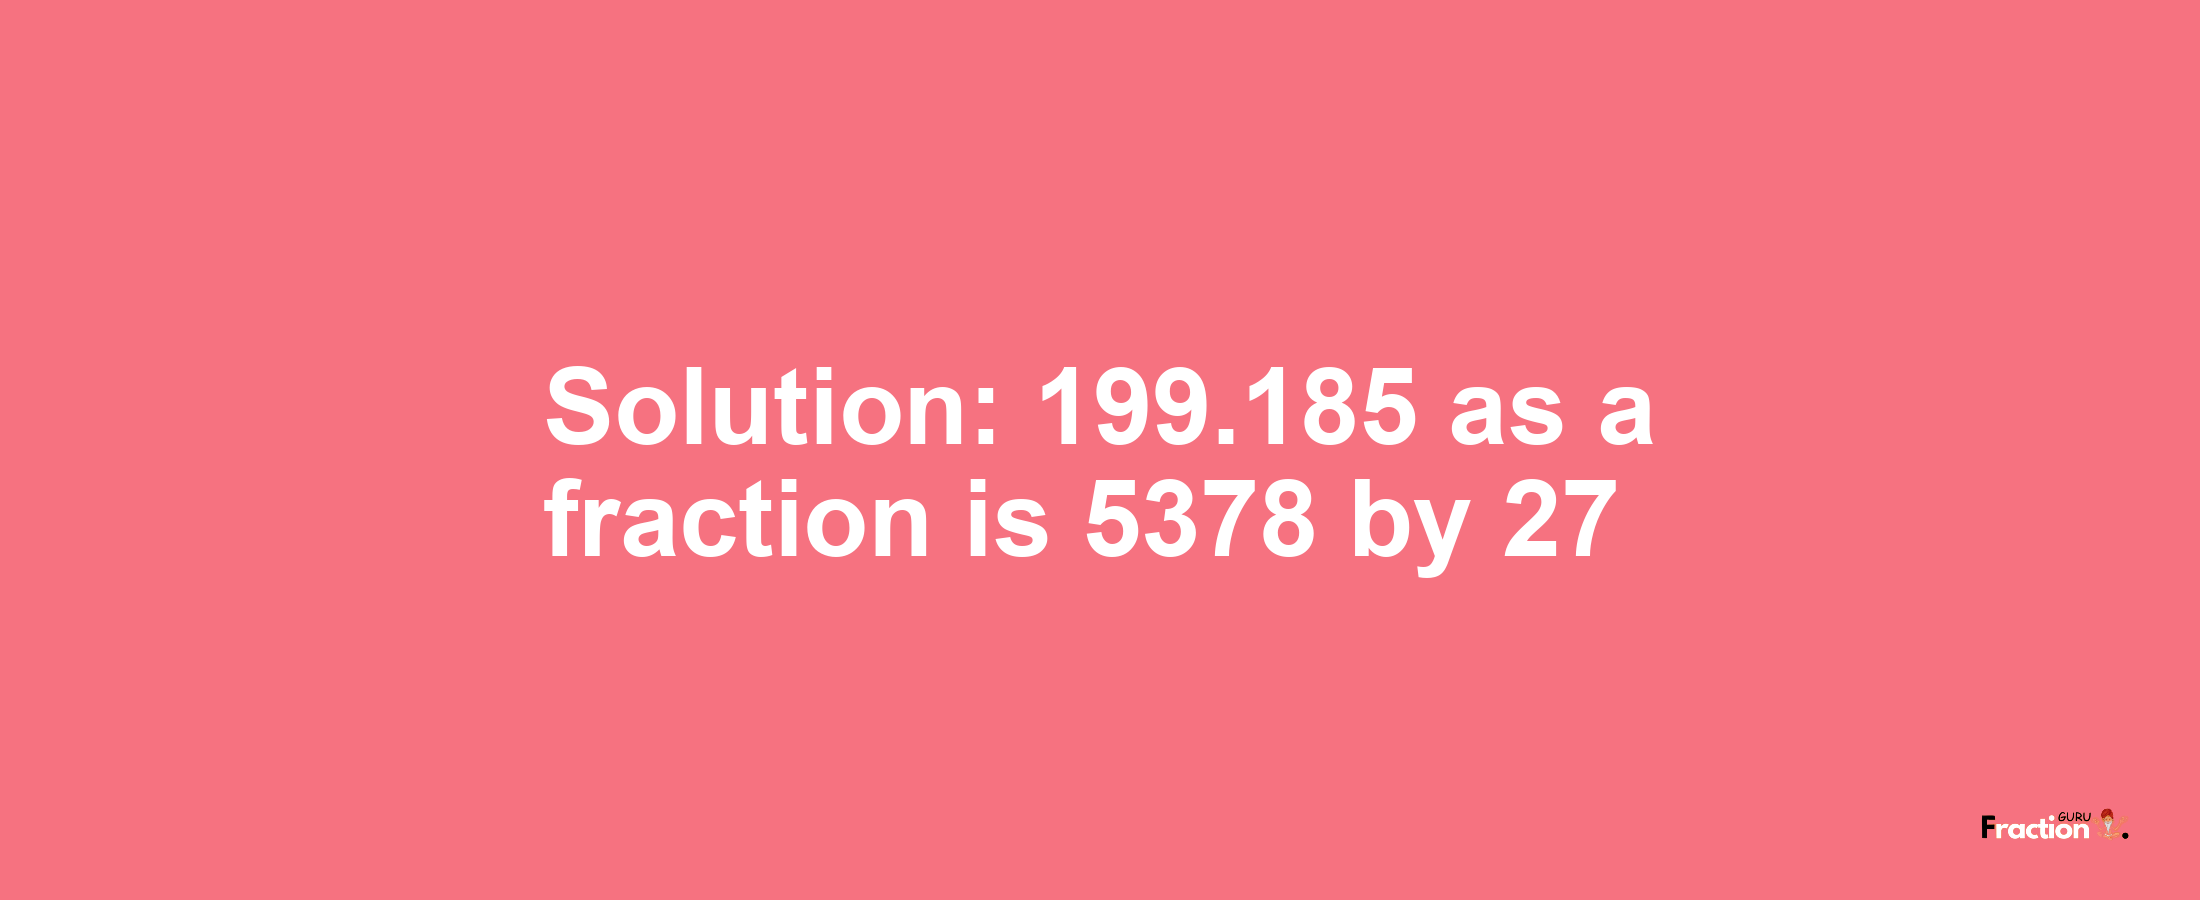 Solution:199.185 as a fraction is 5378/27